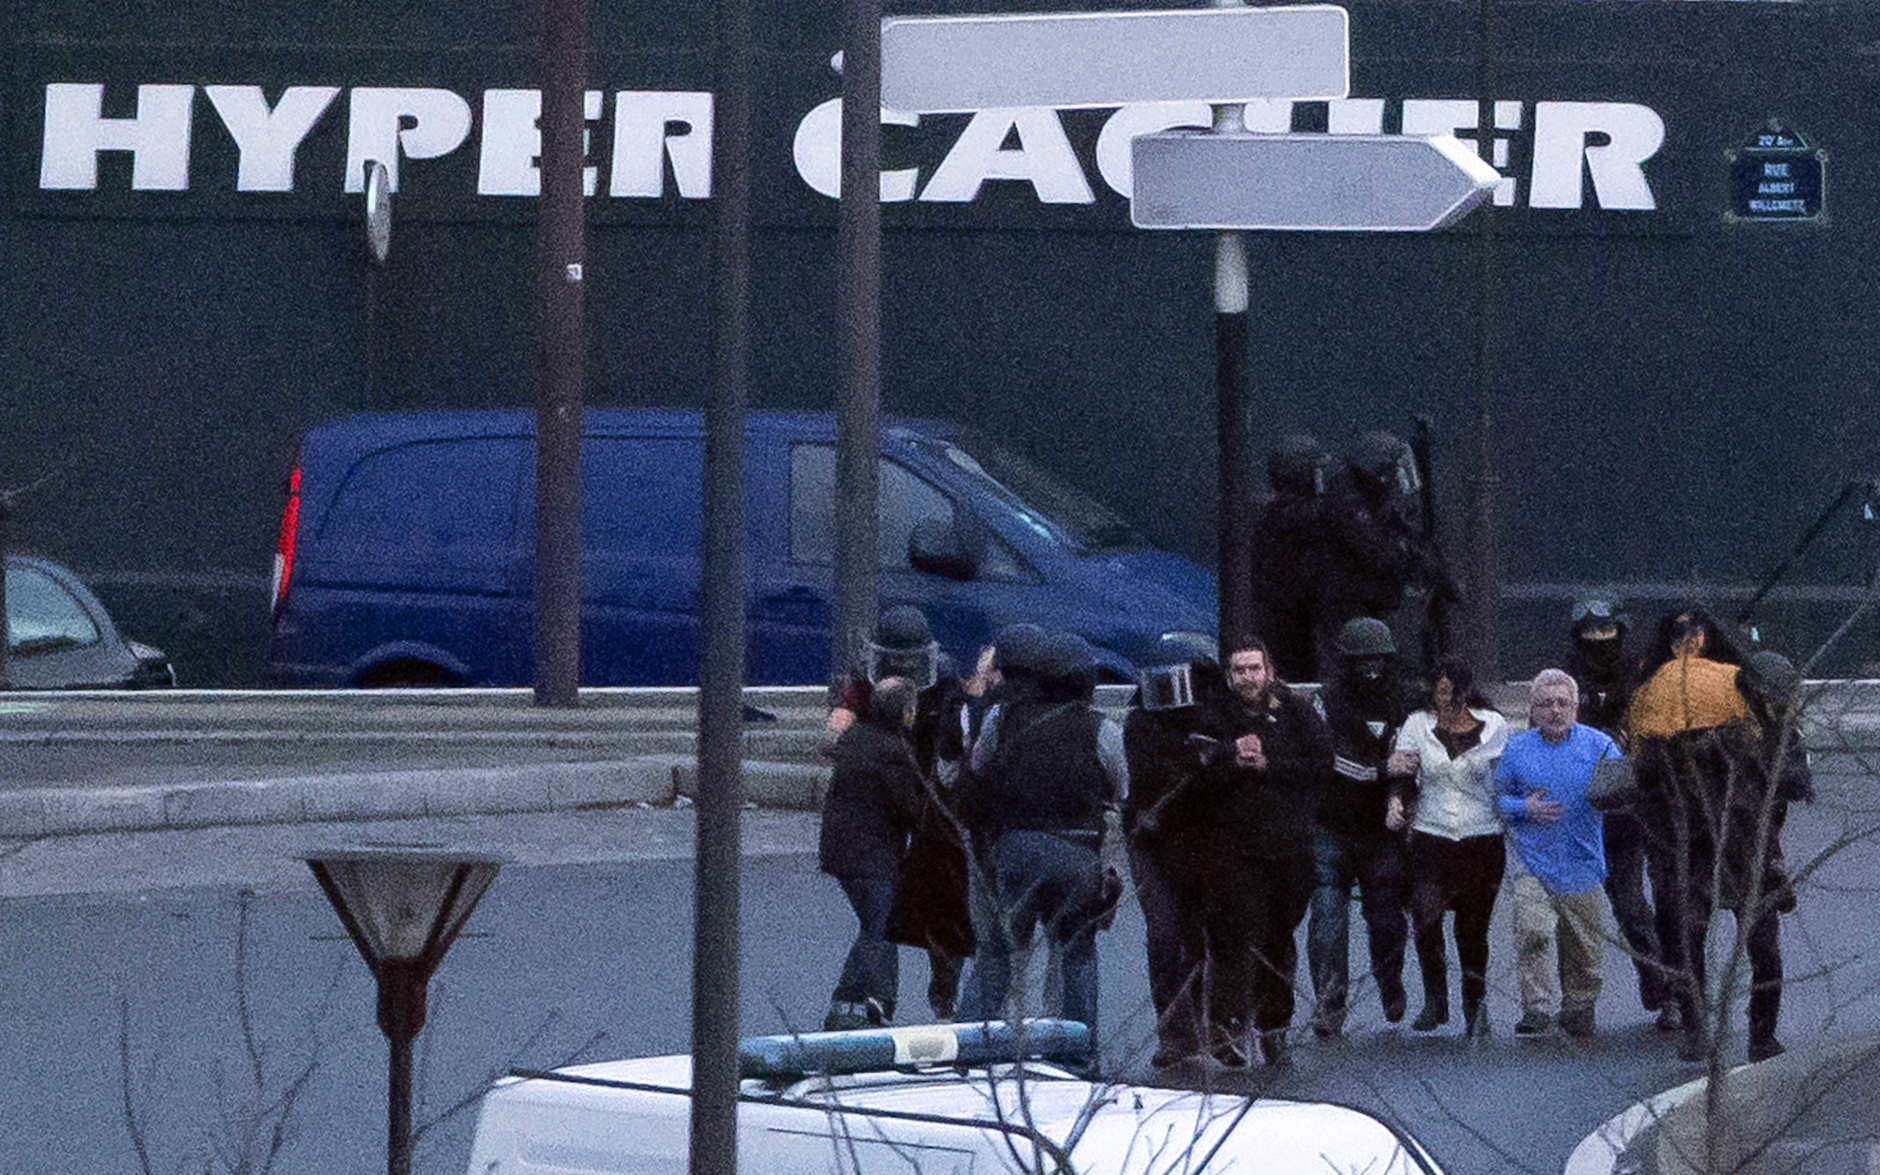 Security officers escort released hostages after they stormed a kosher market to end a hostage situation, Paris, Friday, Jan. 9, 2015. Explosions and gunshots were heard as police forces stormed a kosher grocery in Paris where a gunman was holding at least five people hostage. (AP Photo/Michel Euler)